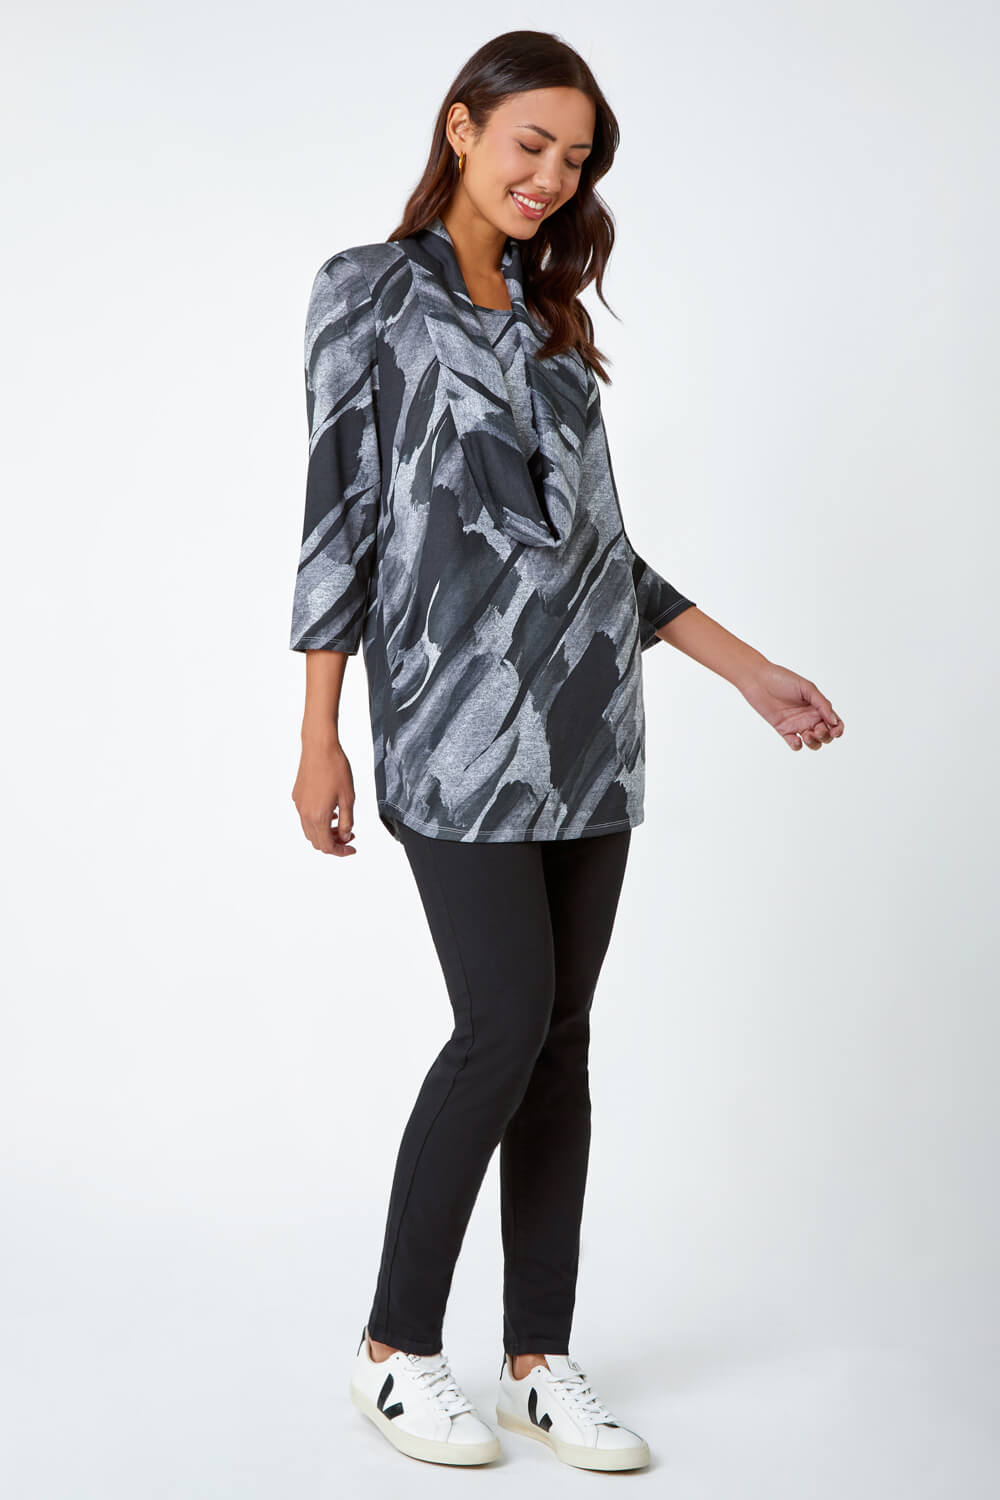 Charcoal Abstract Print Pocket Top with Snood, Image 4 of 5